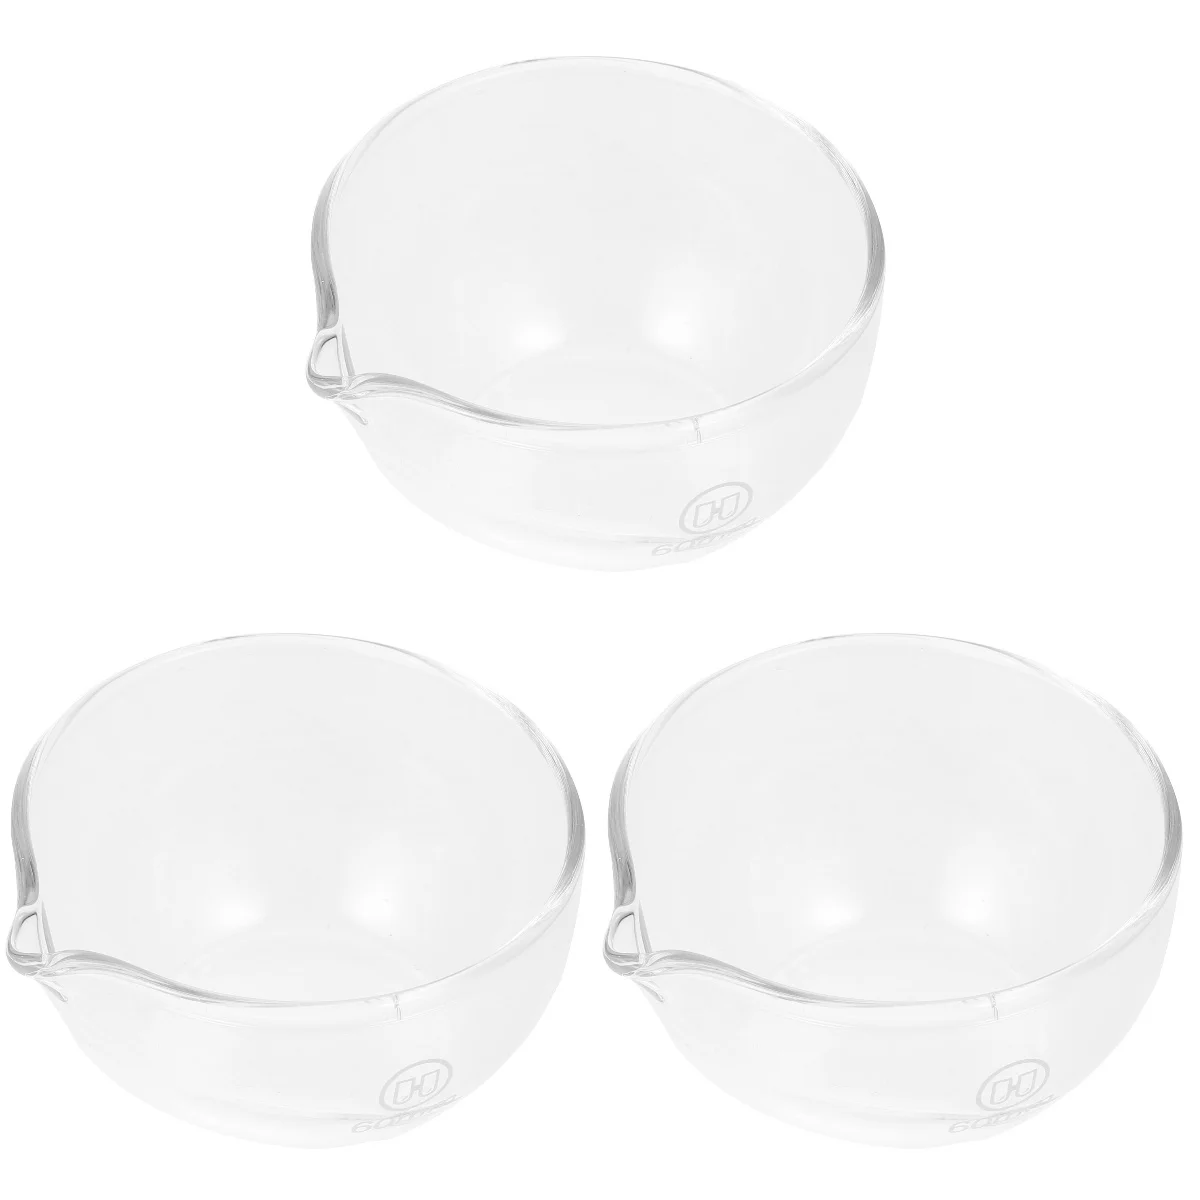 

3pcs Glass Round Evaporating Dish Labs Mixing Dish Bowl Evaporating Basin with Spout